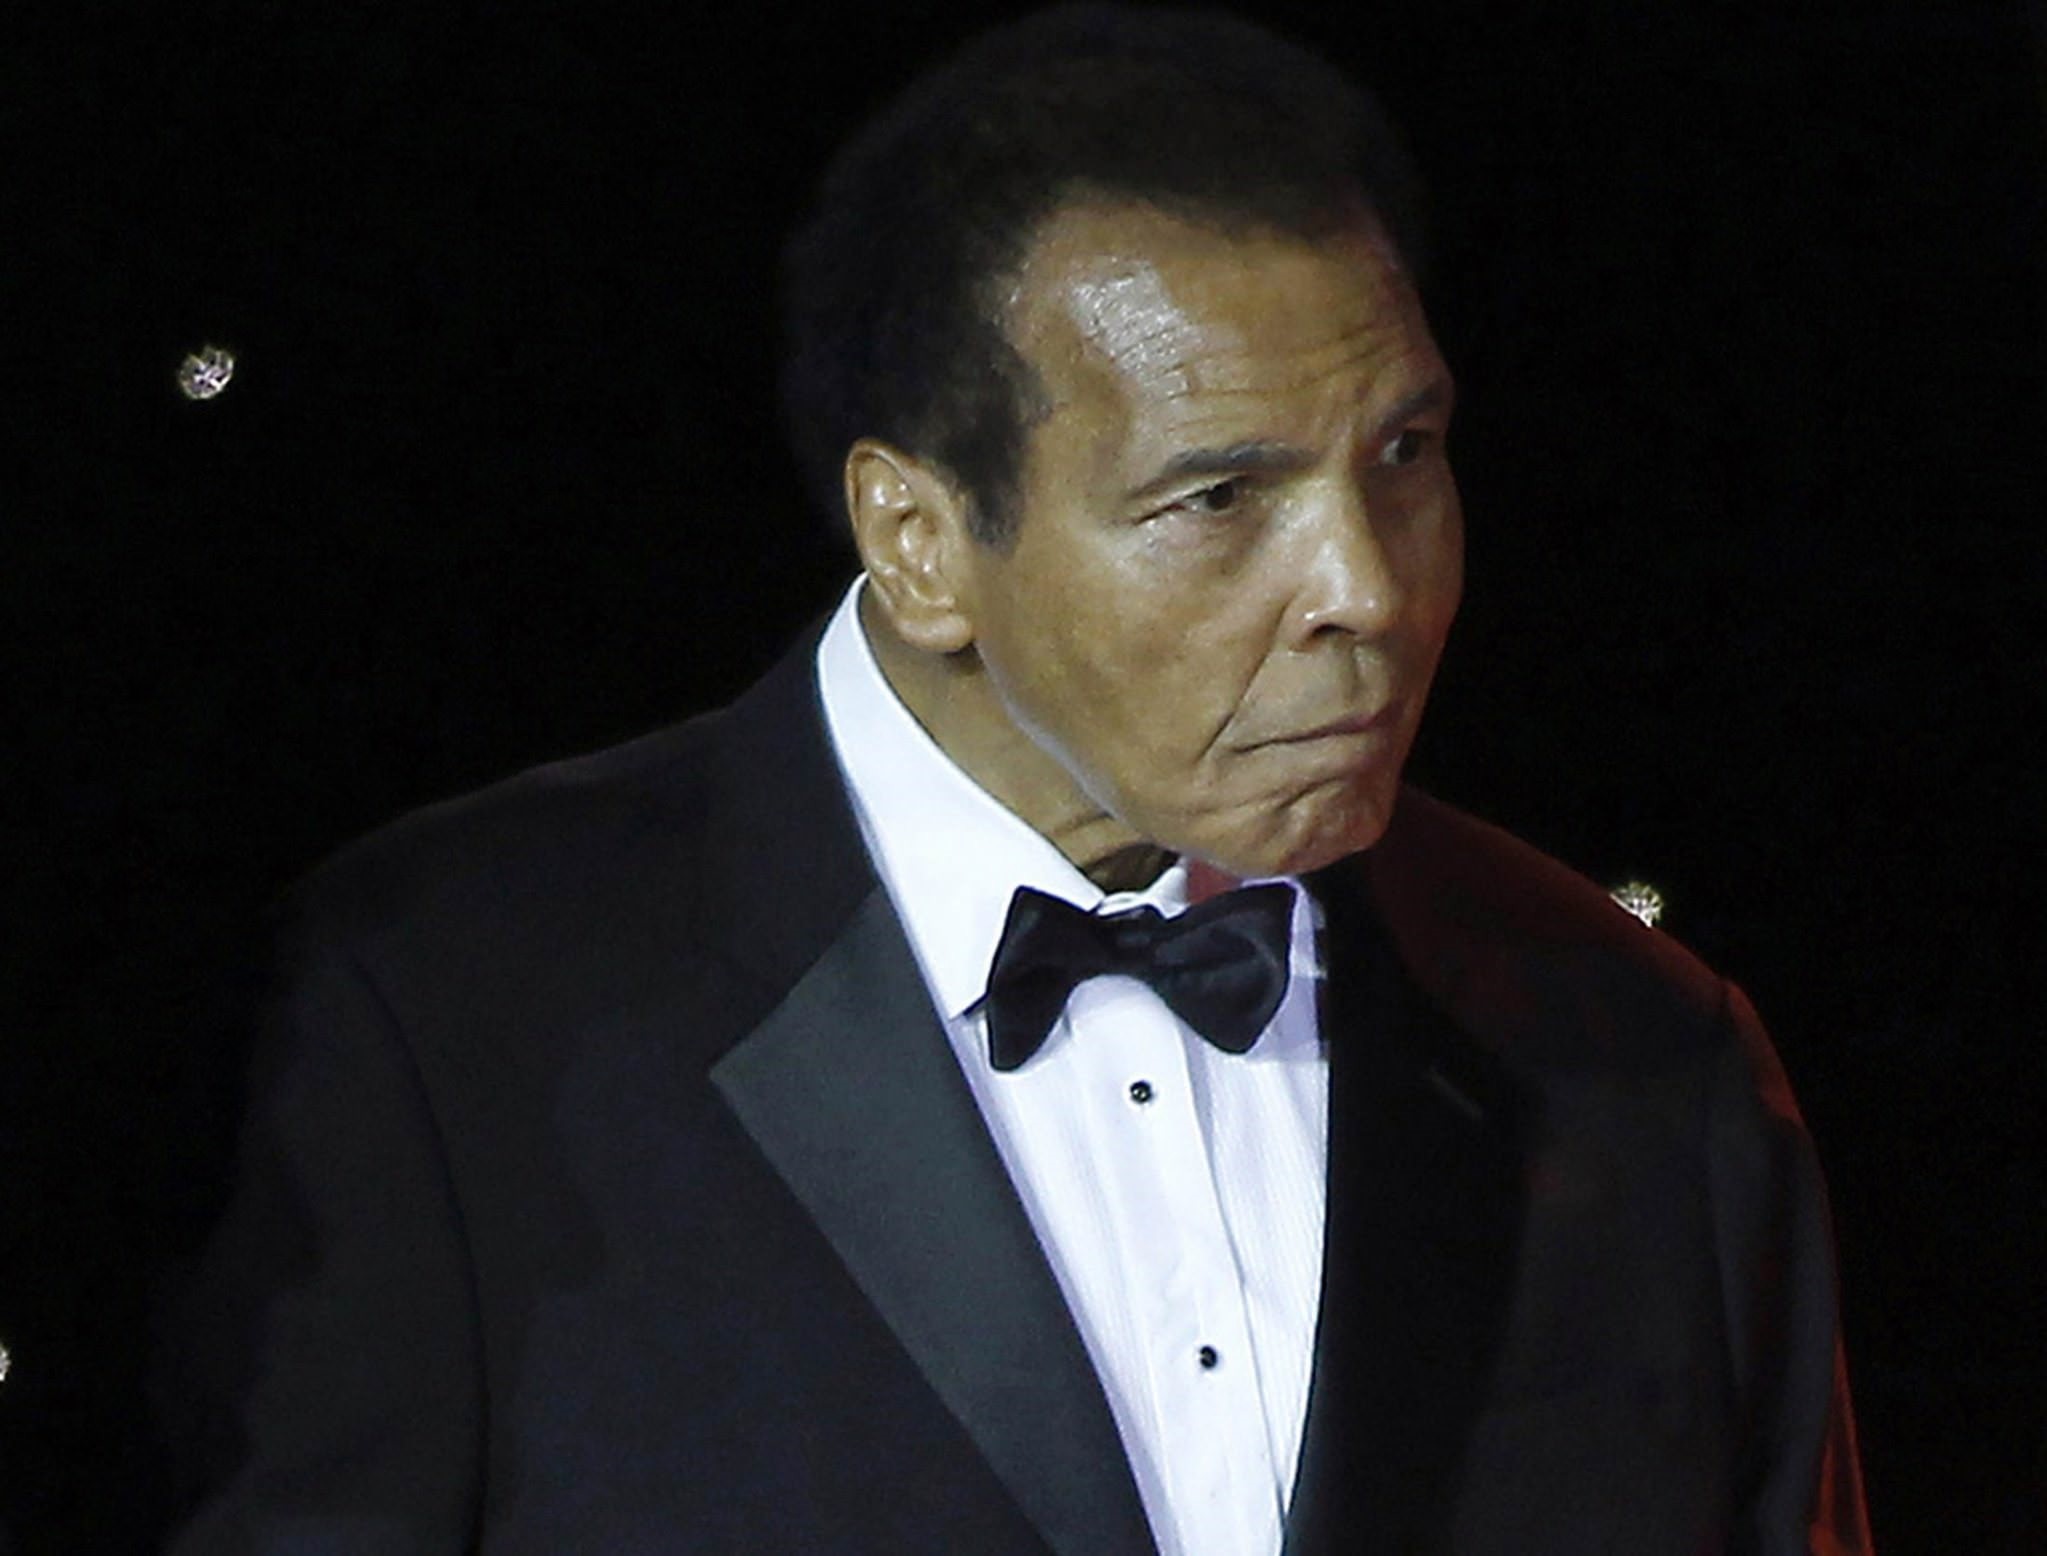 EMuhammed Ali is escorted on stage during The Muhammad Ali Celebrity Fight Night Awards XIX in Phoenix, Arizona in this March 23, 2013 file photo. (Reuters Photo)